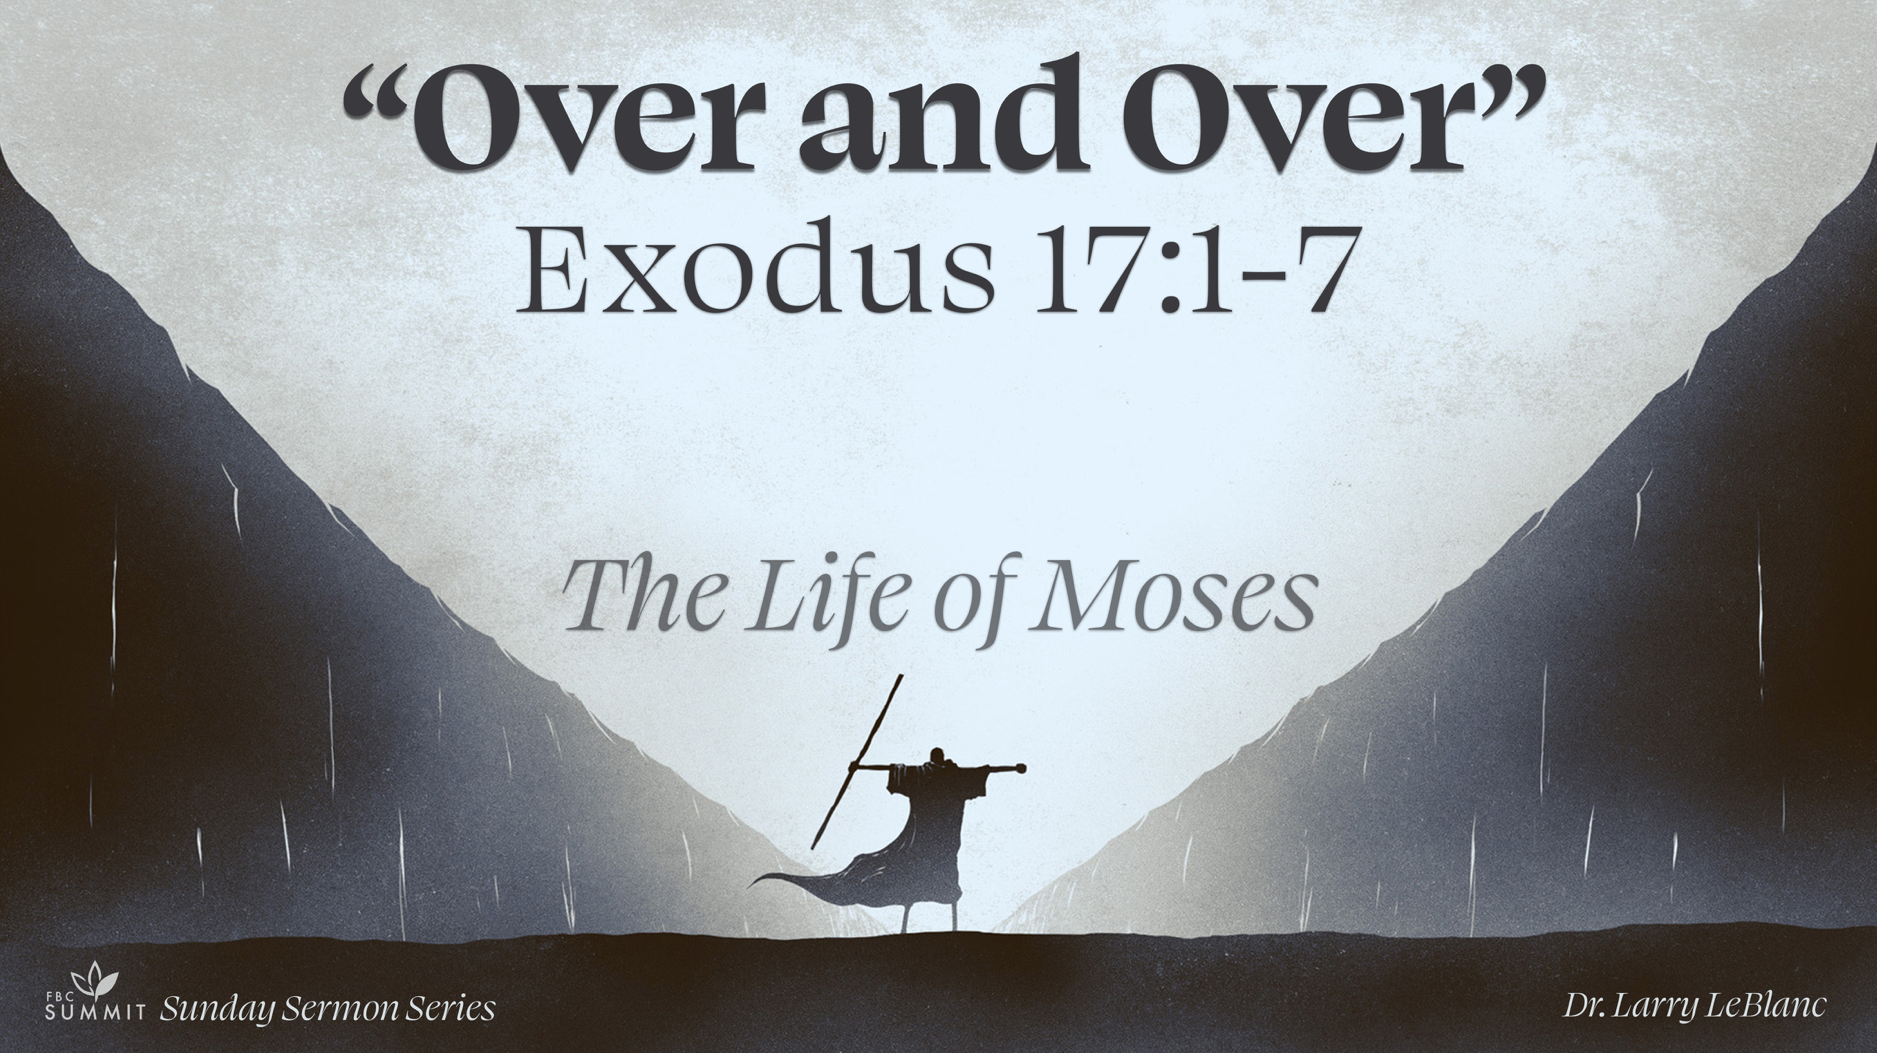 "Over and Over" Exodus 17:1-7